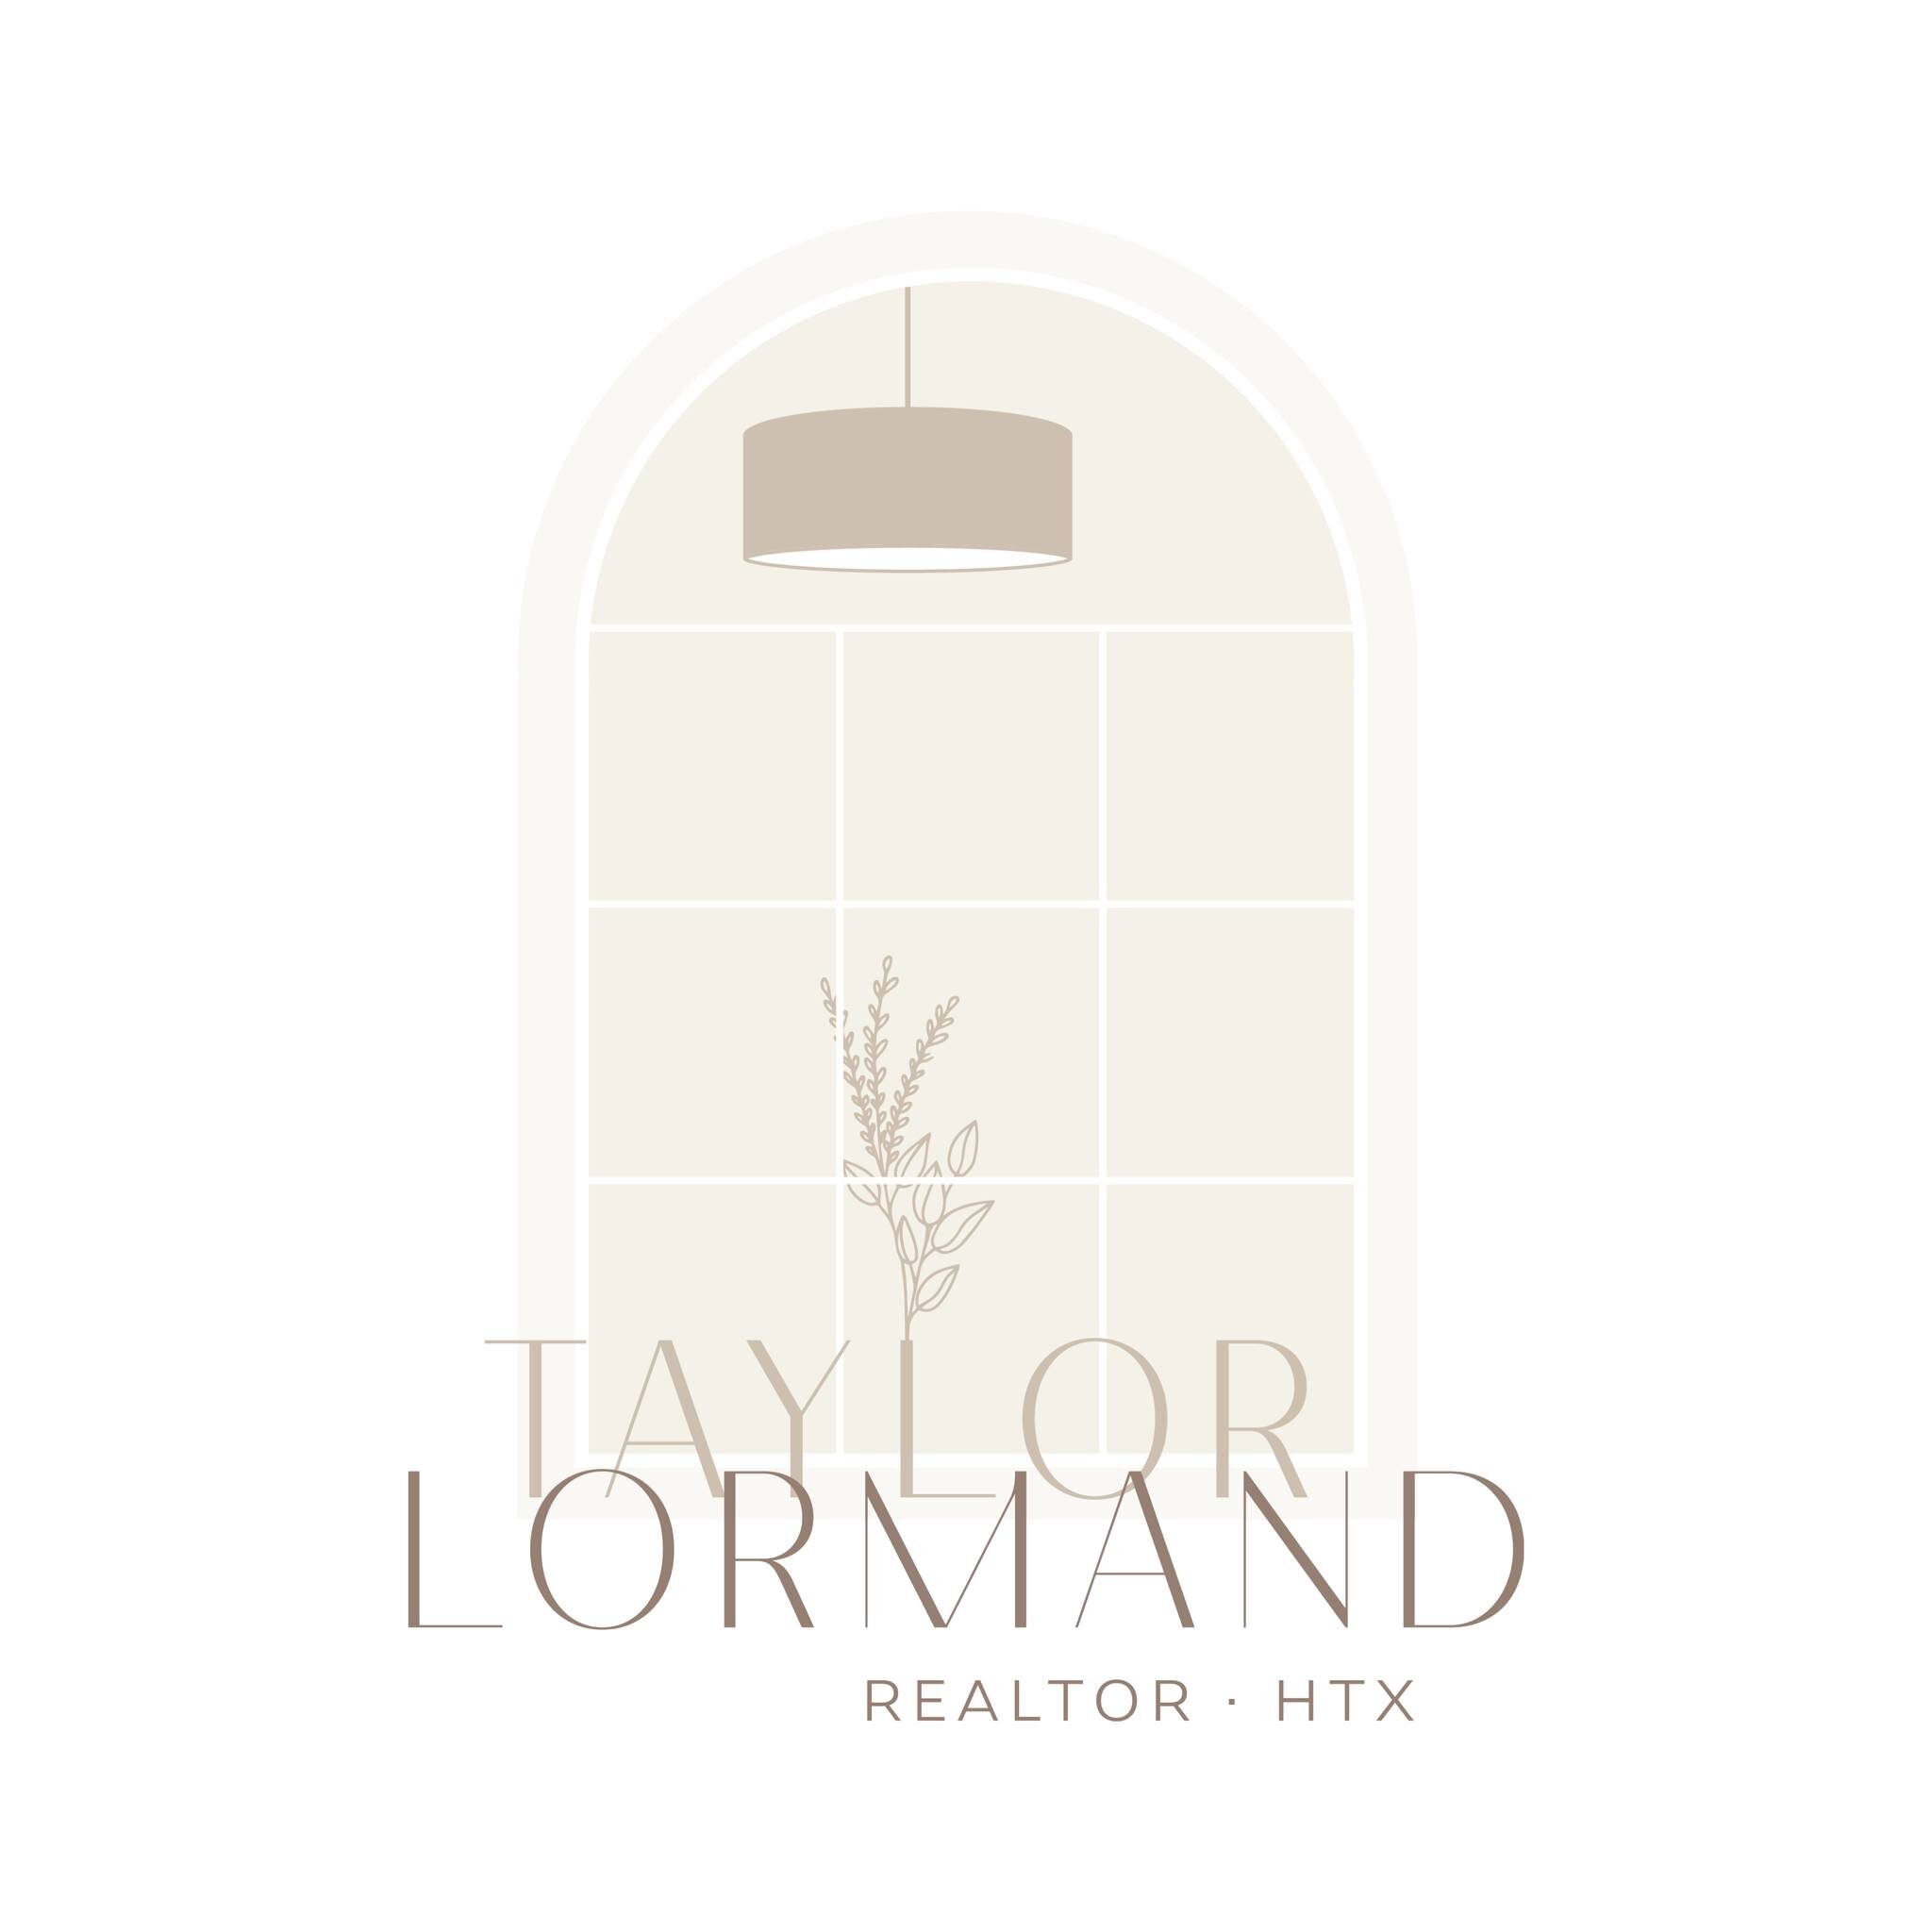 Taylor Lormand is bringing her own brand of real estate magic to Houston, TX to help families find their dream homes. Taylor has a reputation for making anything she puts her mind to happen on a large scale and I can't wait to watch the difference sh